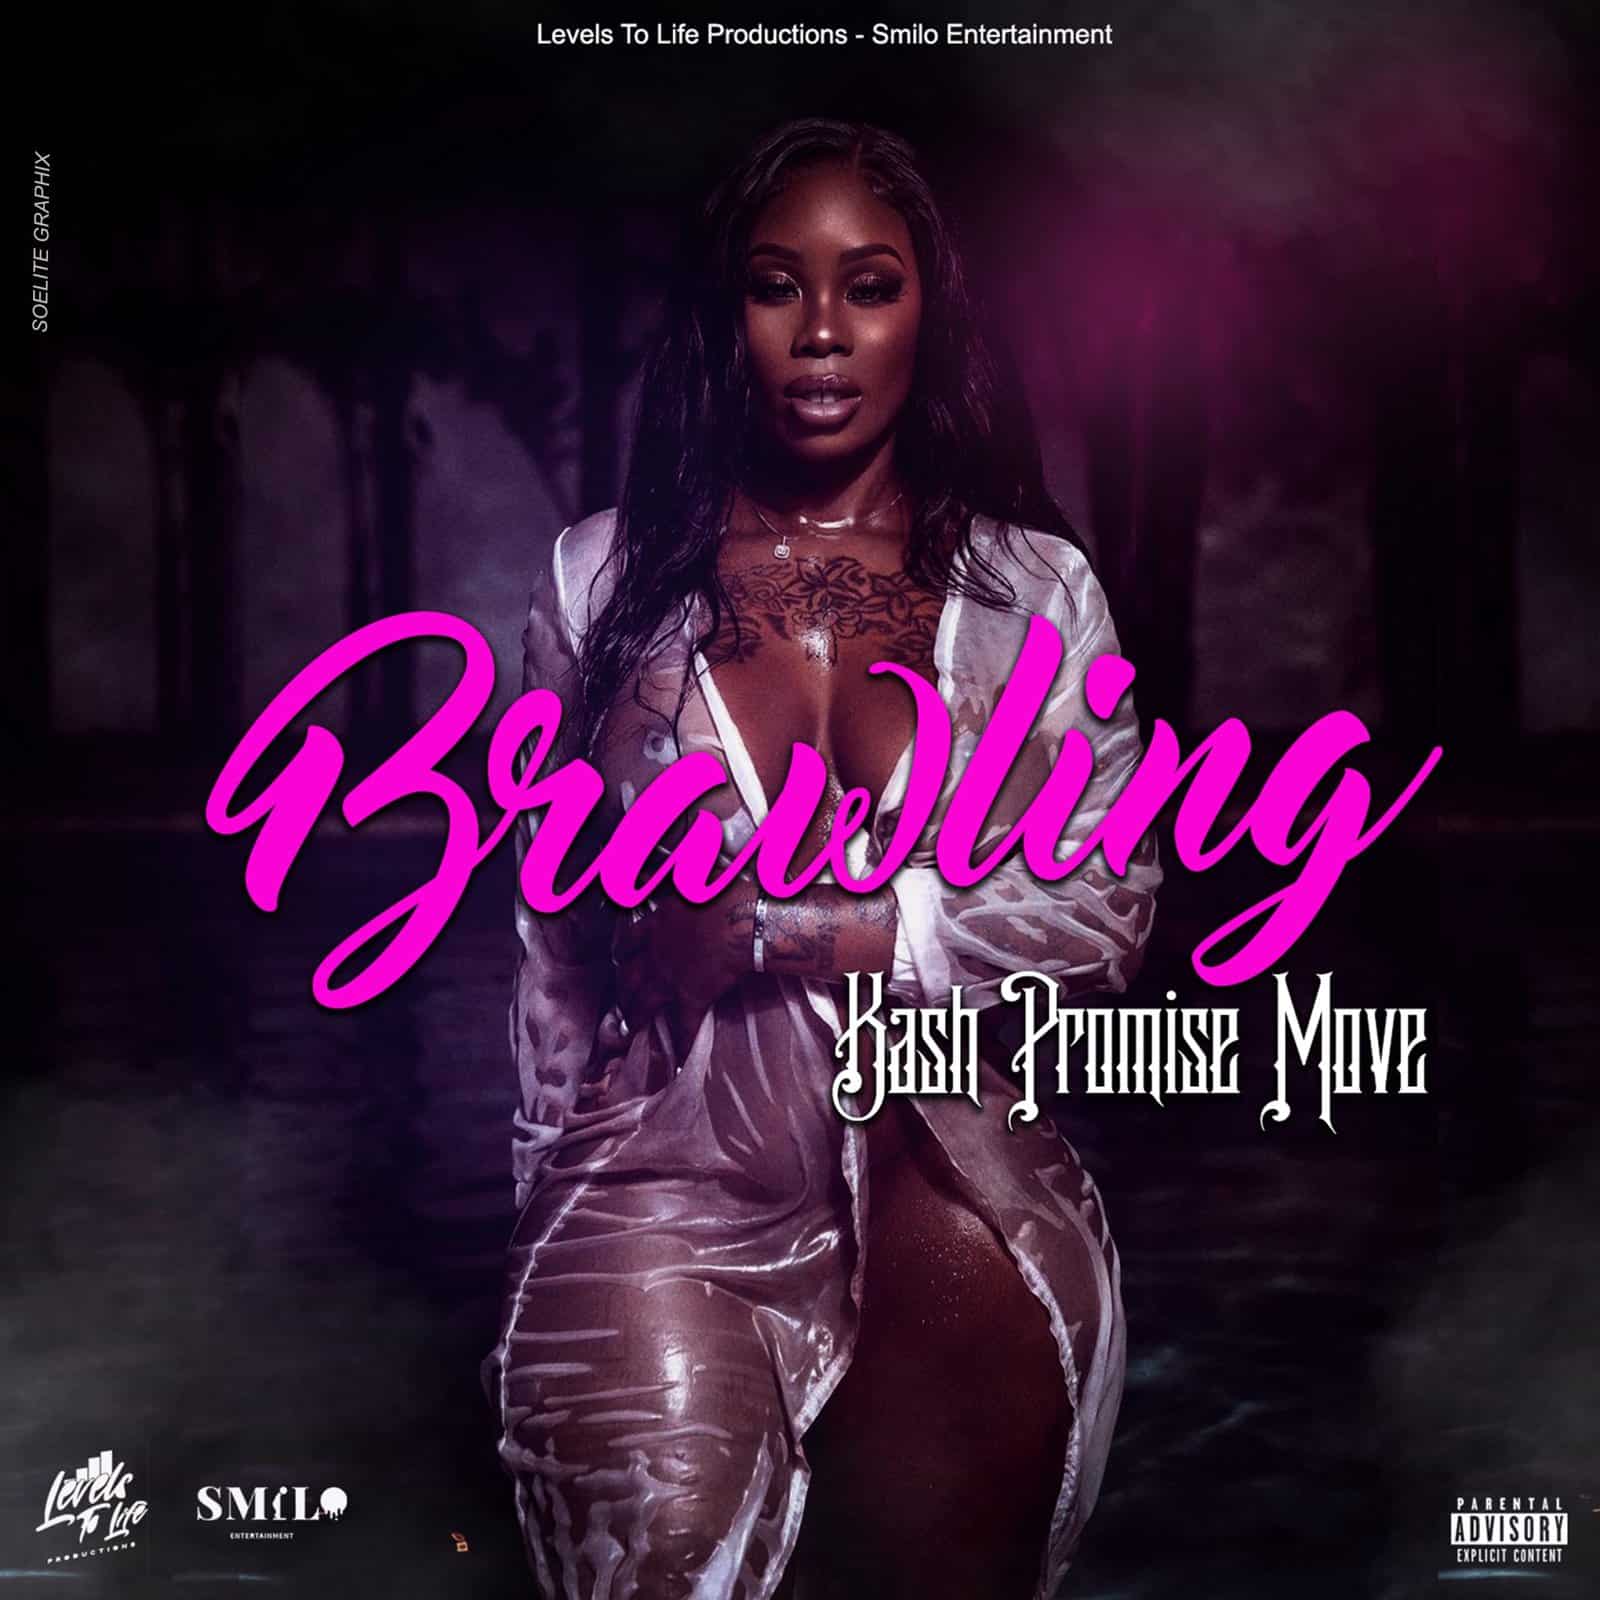 Kash Promise Move - Brawling - Levels To Life Productions / Smilo Entertainment